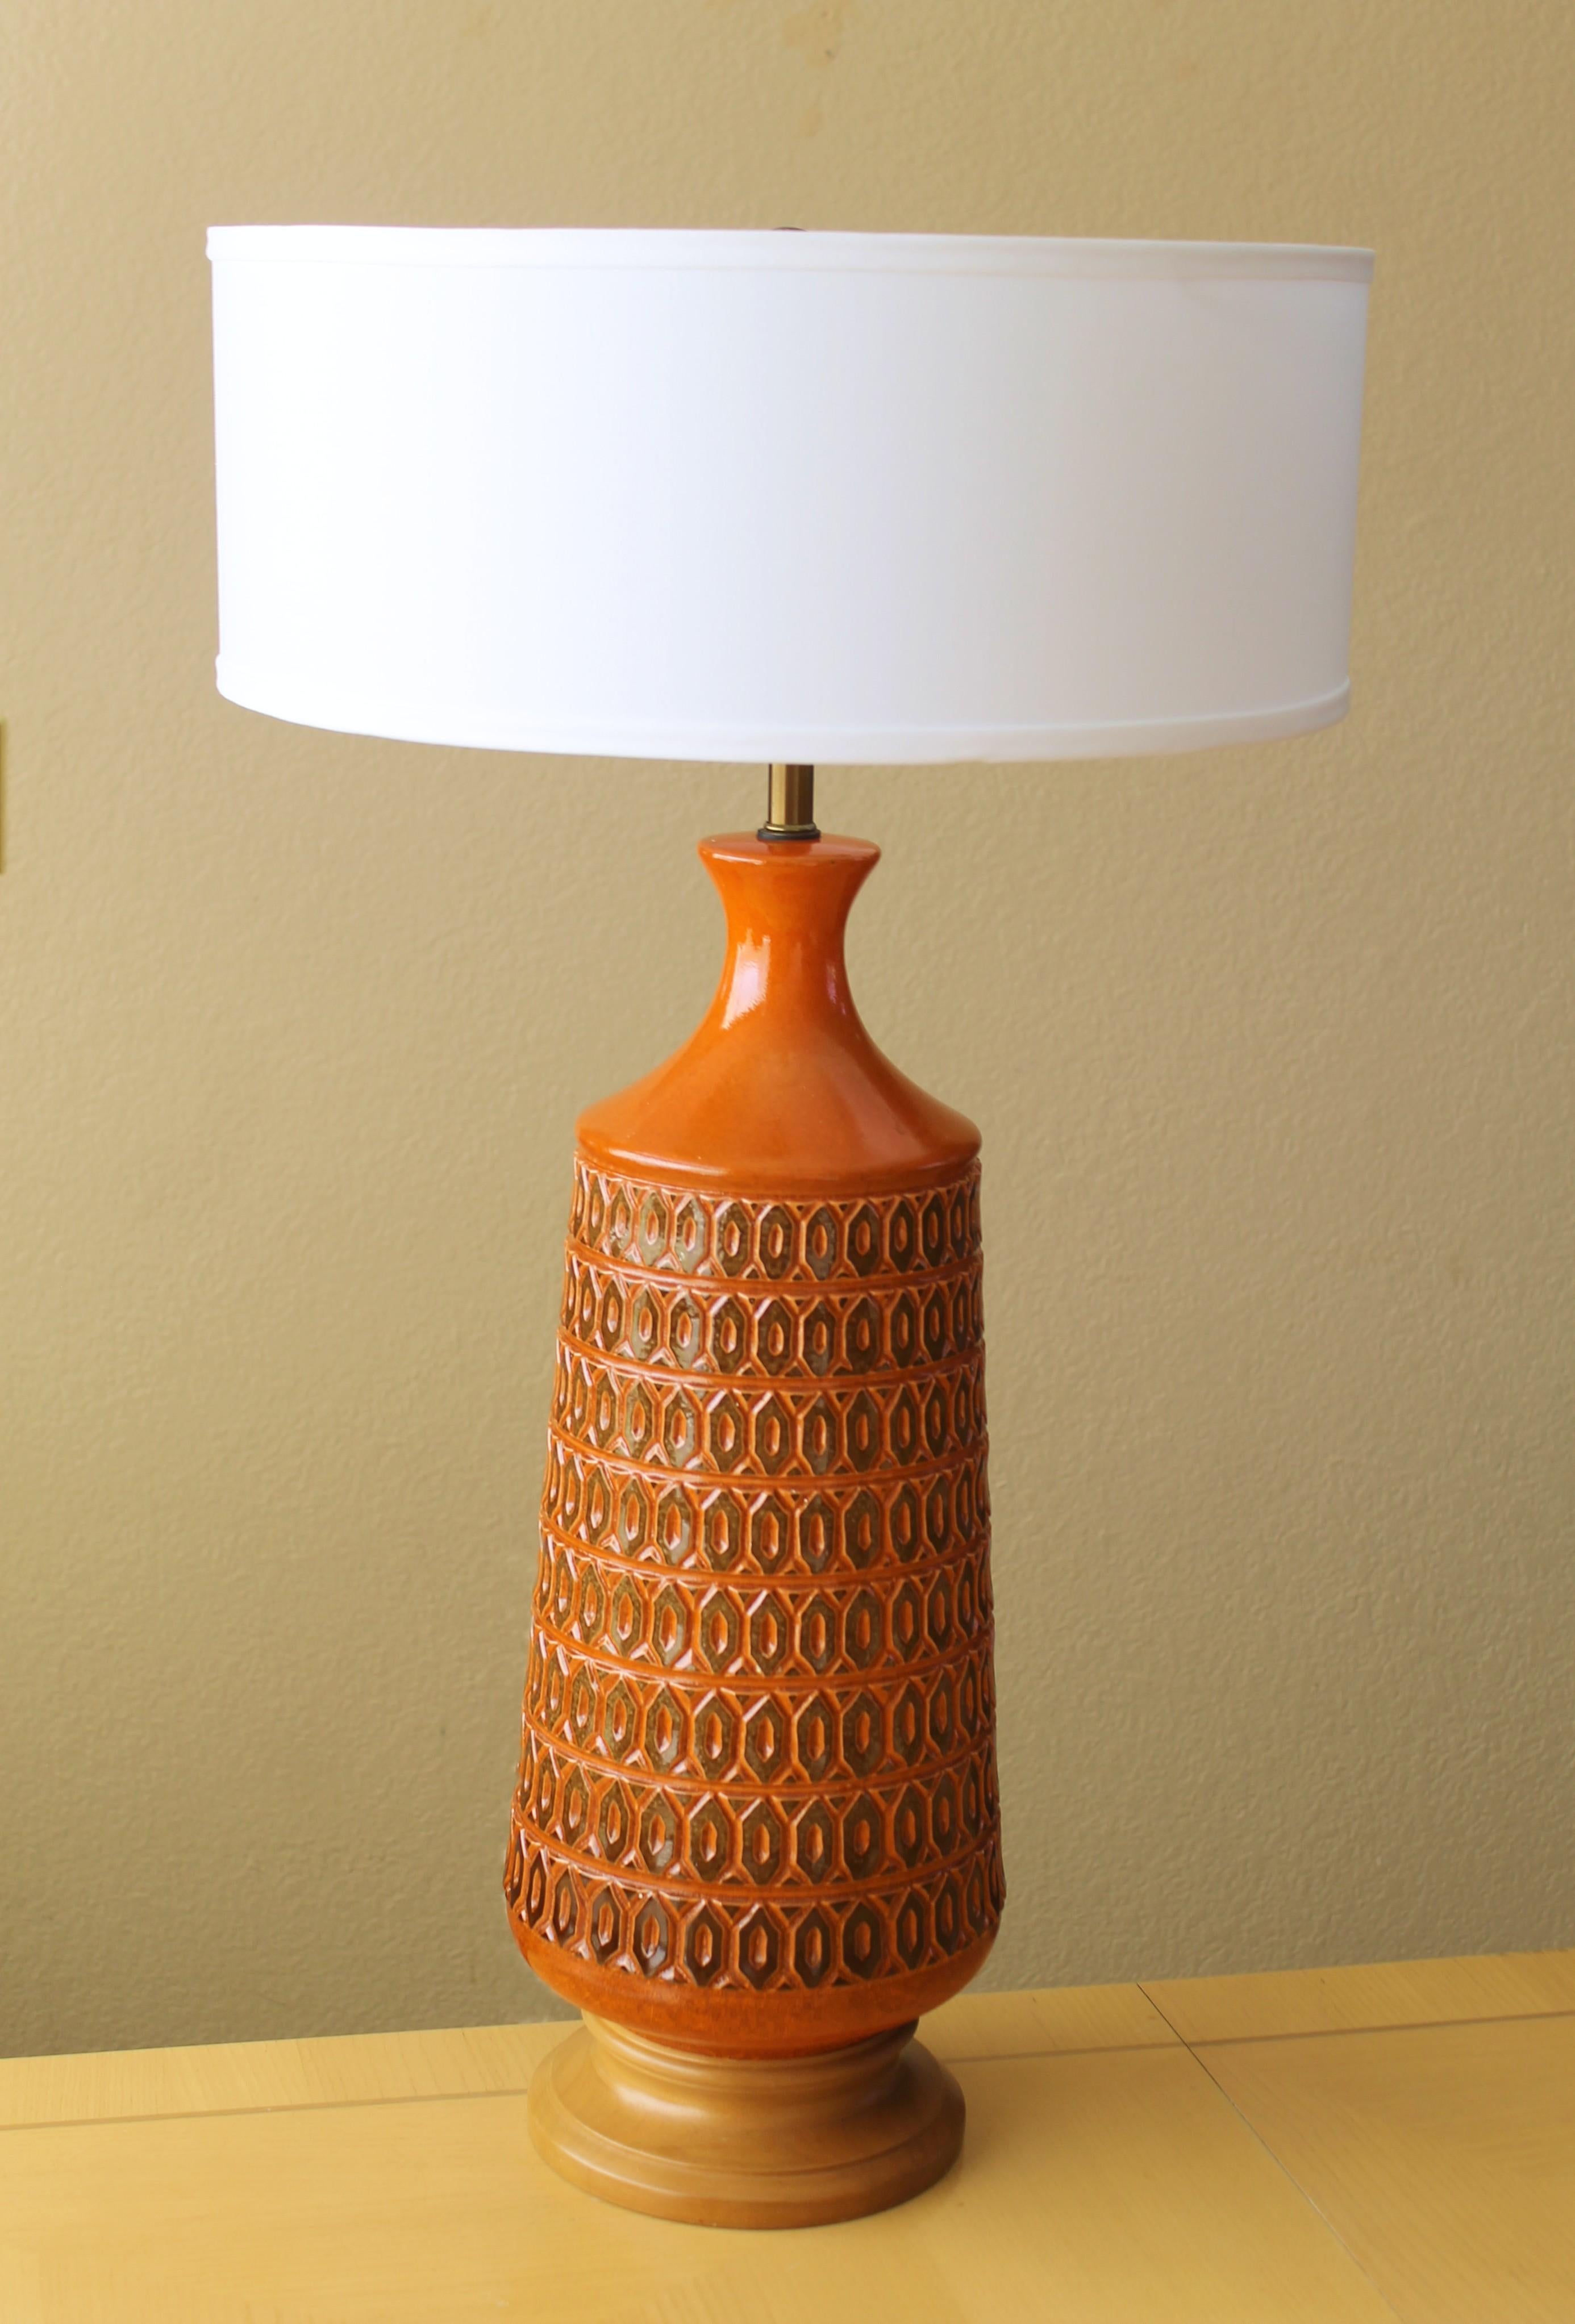 Magnificent!

Stunning Orange Sculptured
Italian Pottery Table Lamp
For Raymor

Attributed to Aldo Londi

This sensational lamp is a testimony to the Italian pottery house of the mid century!  Magnificent detail that took incredible work to sculpt